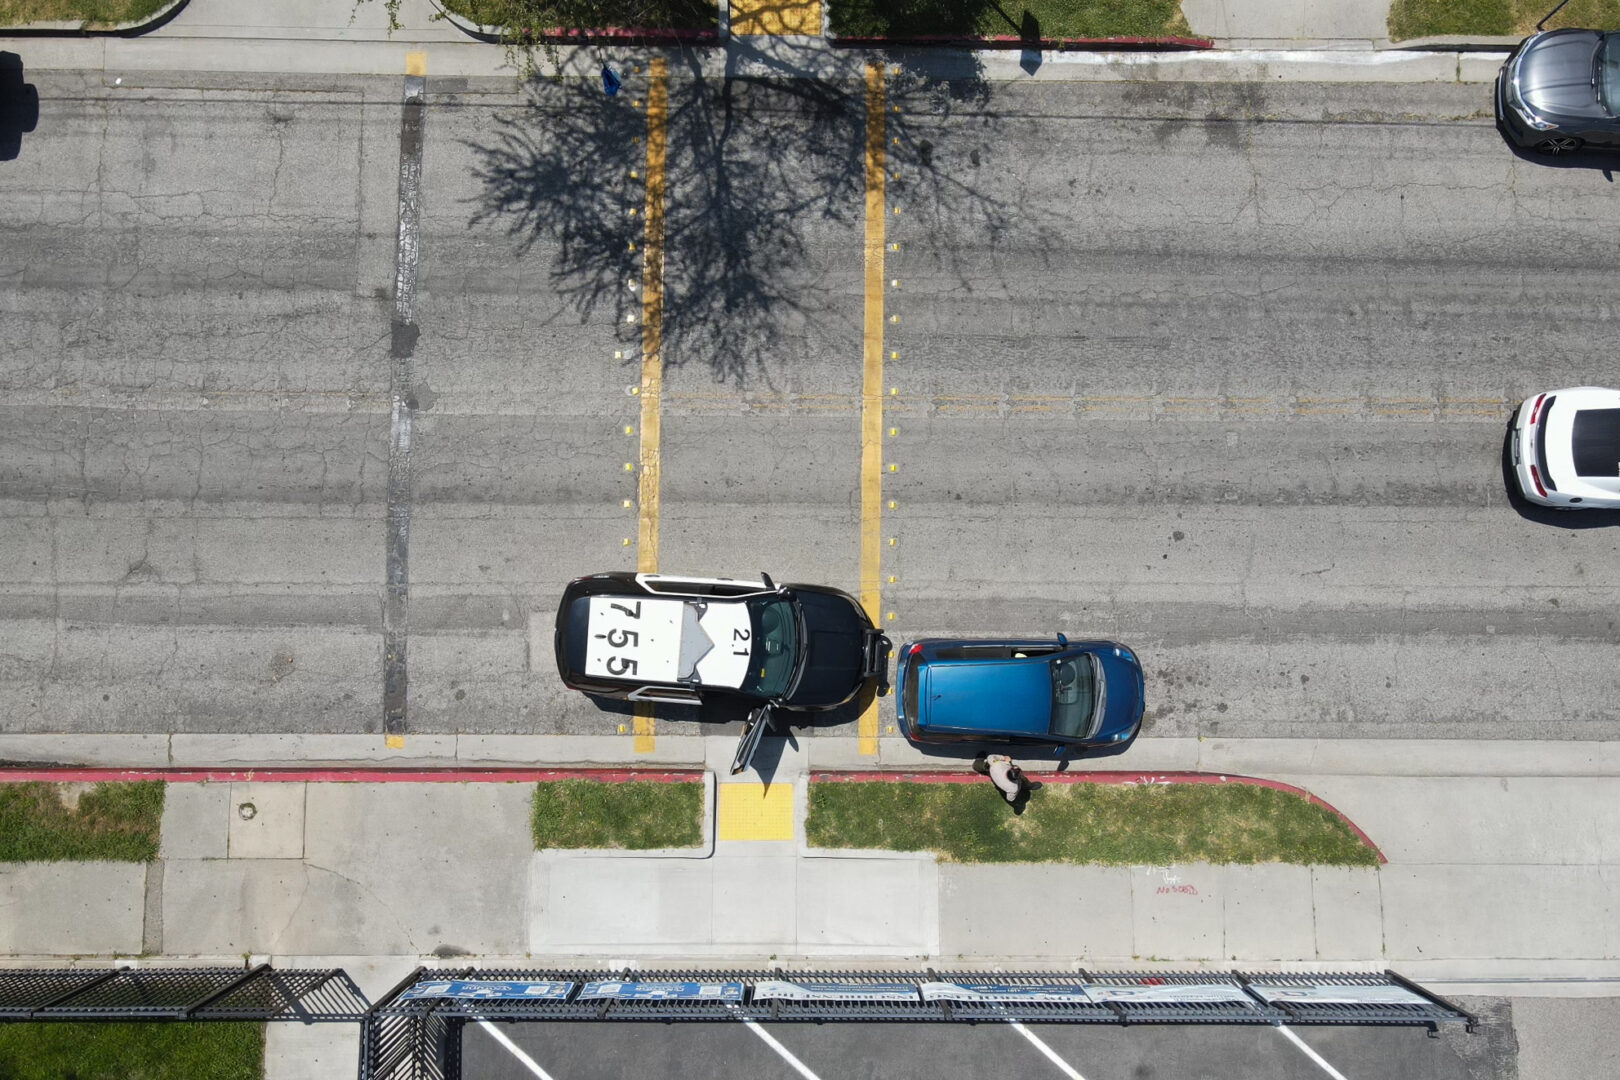 An aerial view of a deputy sheriff pulling over a driver in front of a school. We see the asphalt, an LASD vehicle that says "755" and a deputy sheriff at the passenger side door of a blue car.